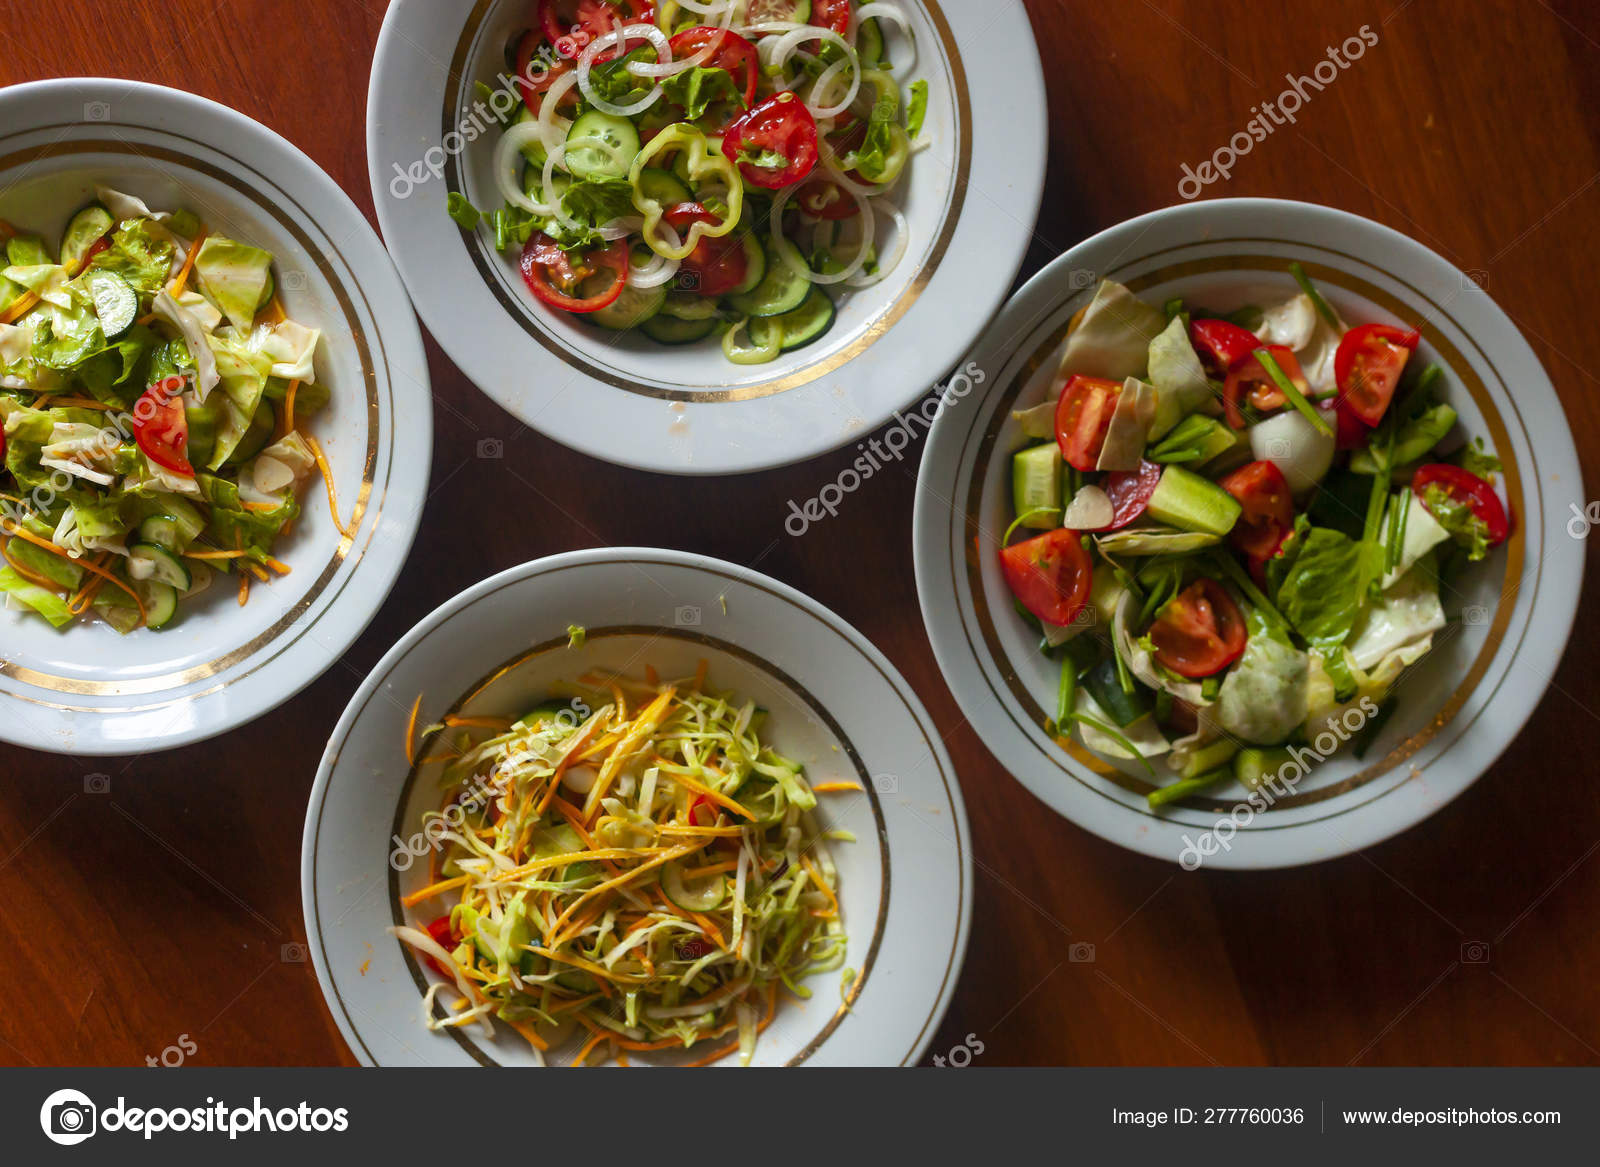 Salad Bowls With Mixed Fresh Vegetables Photograph by JM Travel